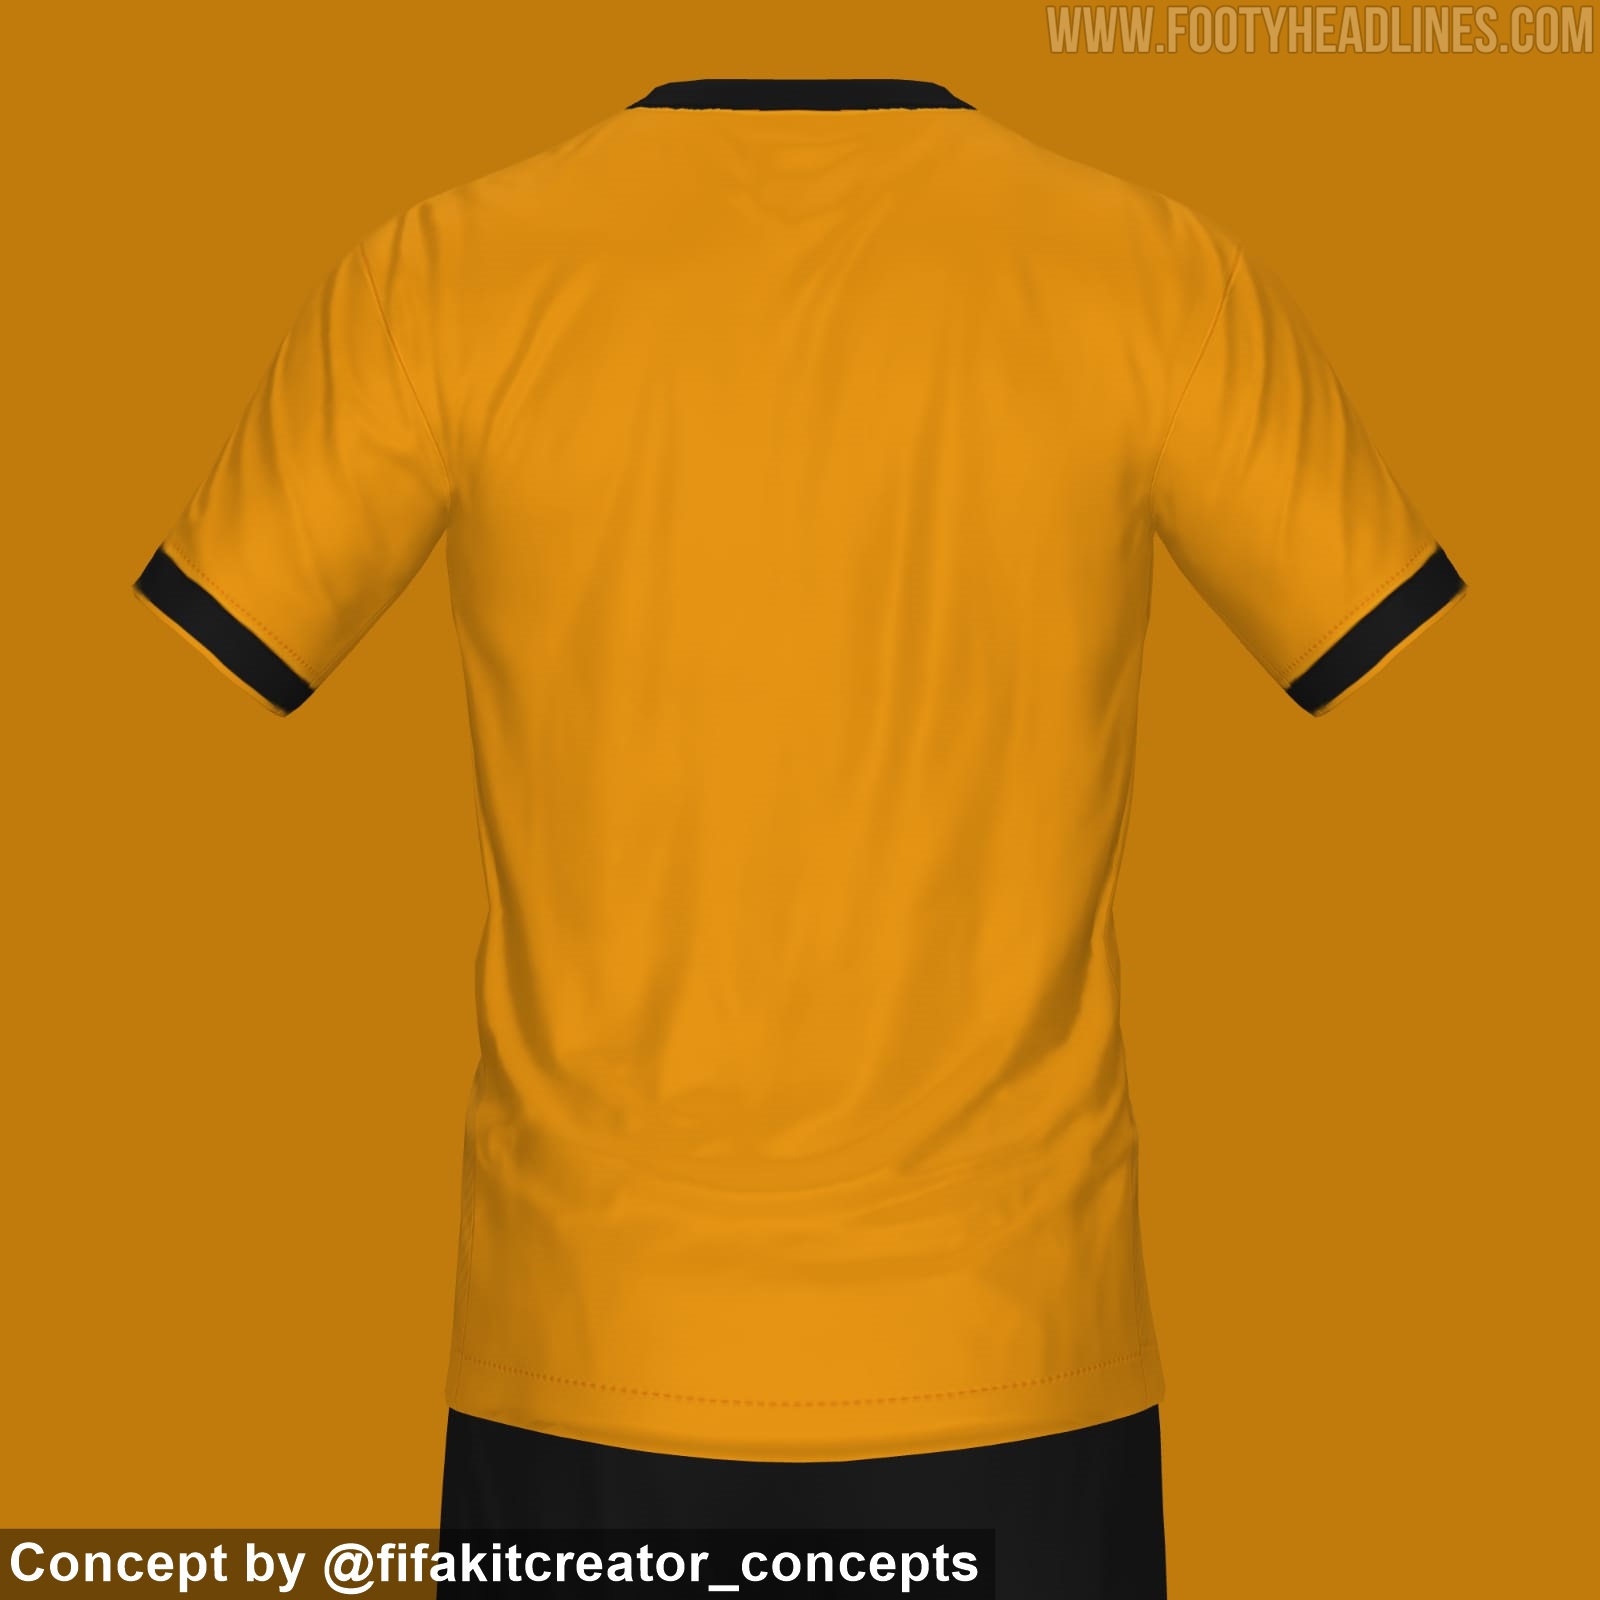 Castore Wolves 21-22 Concept Kits - Footy Headlines